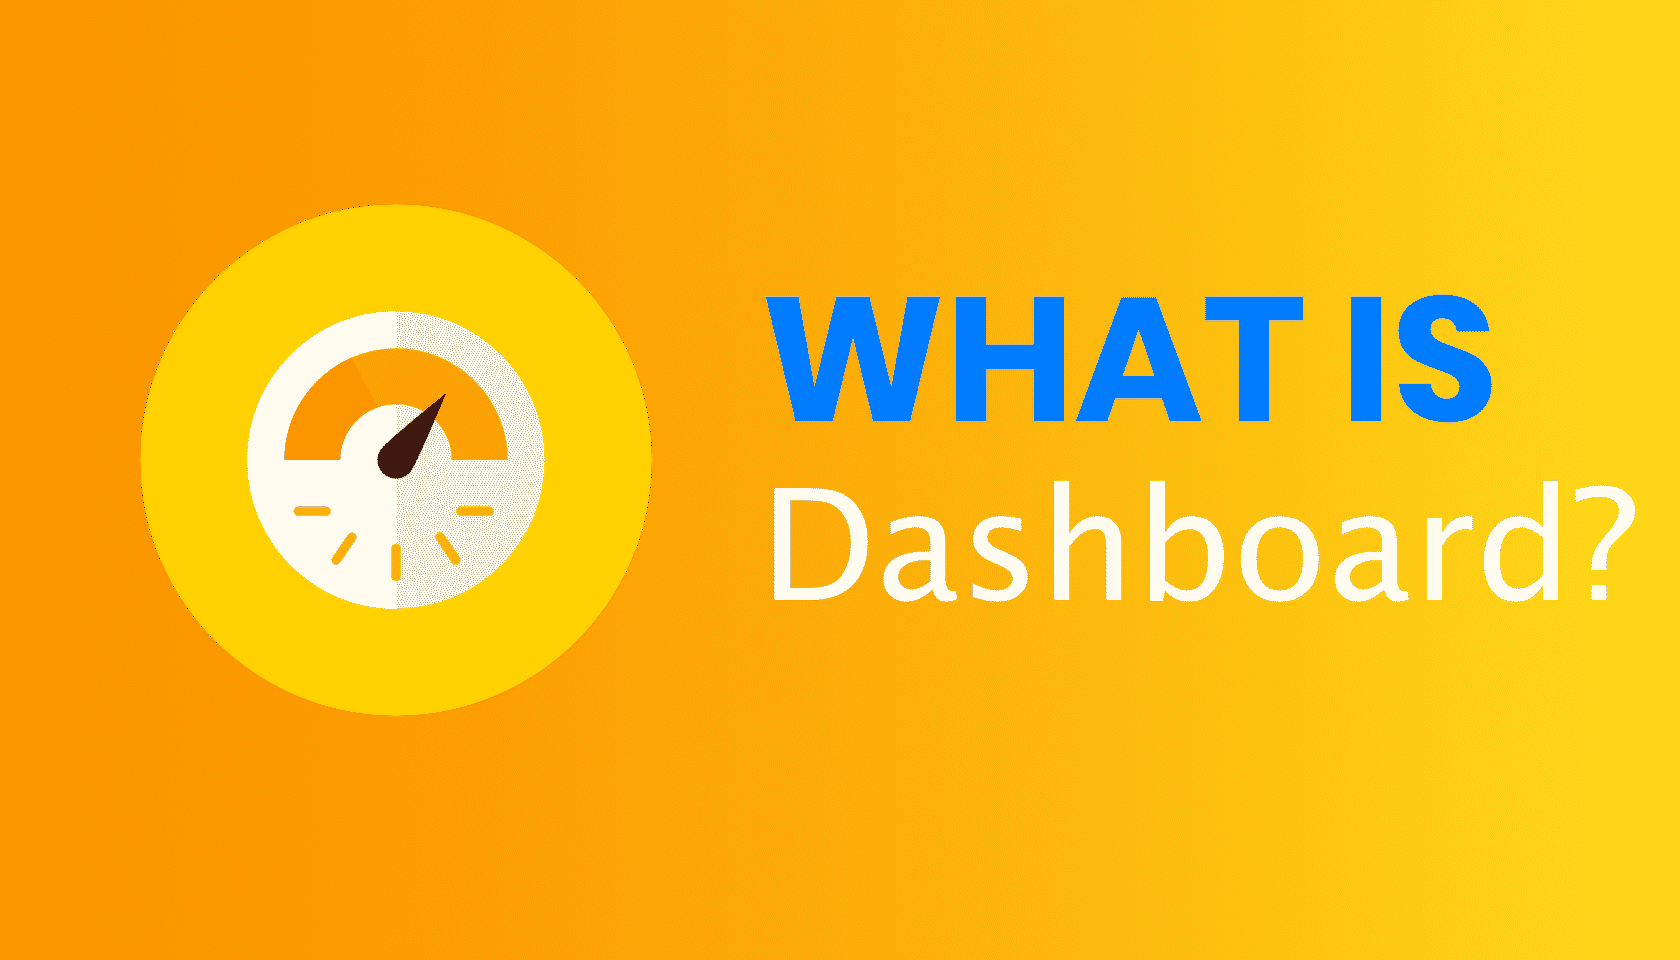 What is: Blogging Dashboard